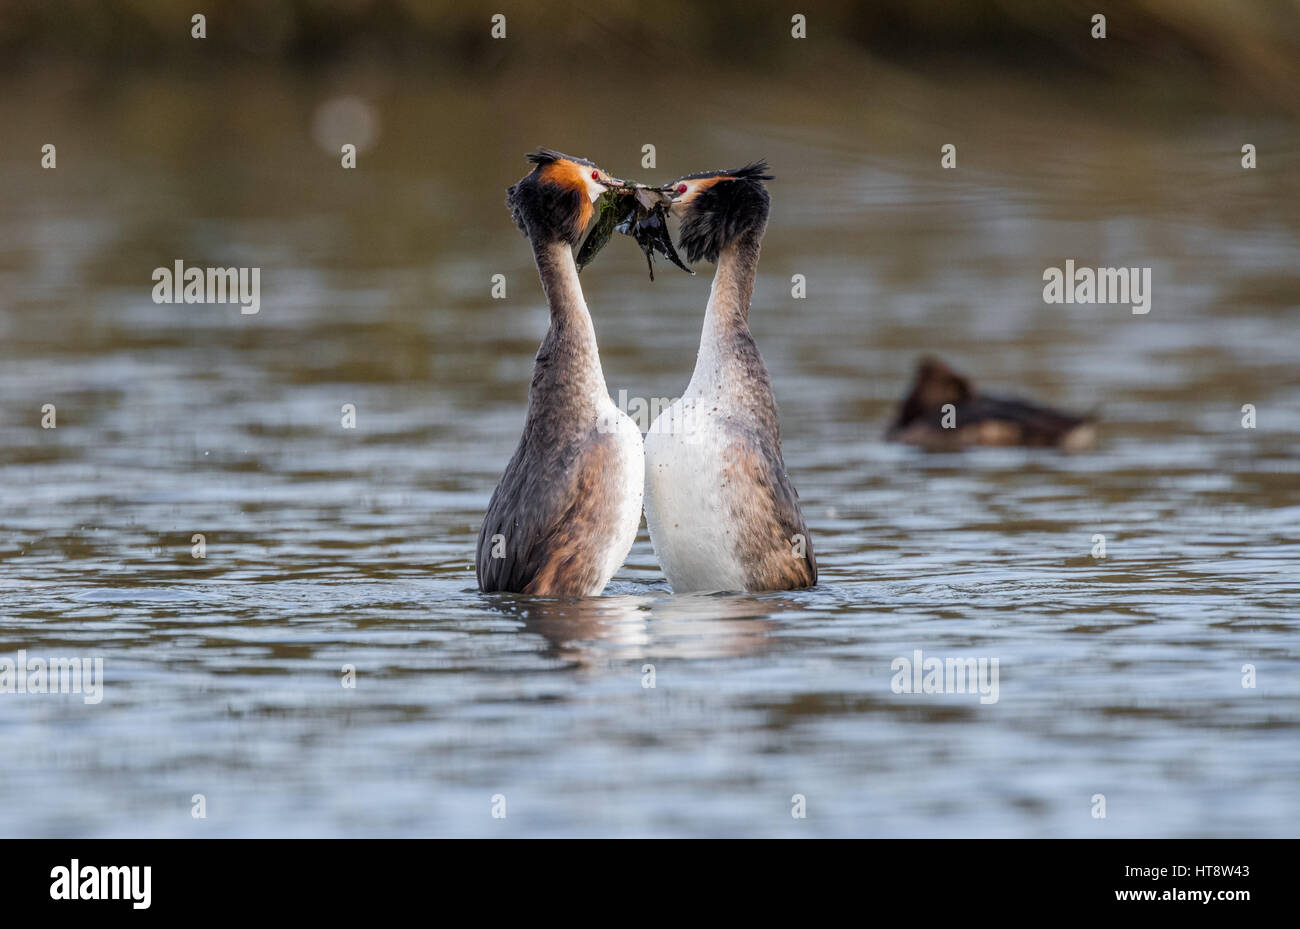 Adult Great Crested Grebes courtship routine Stock Photo